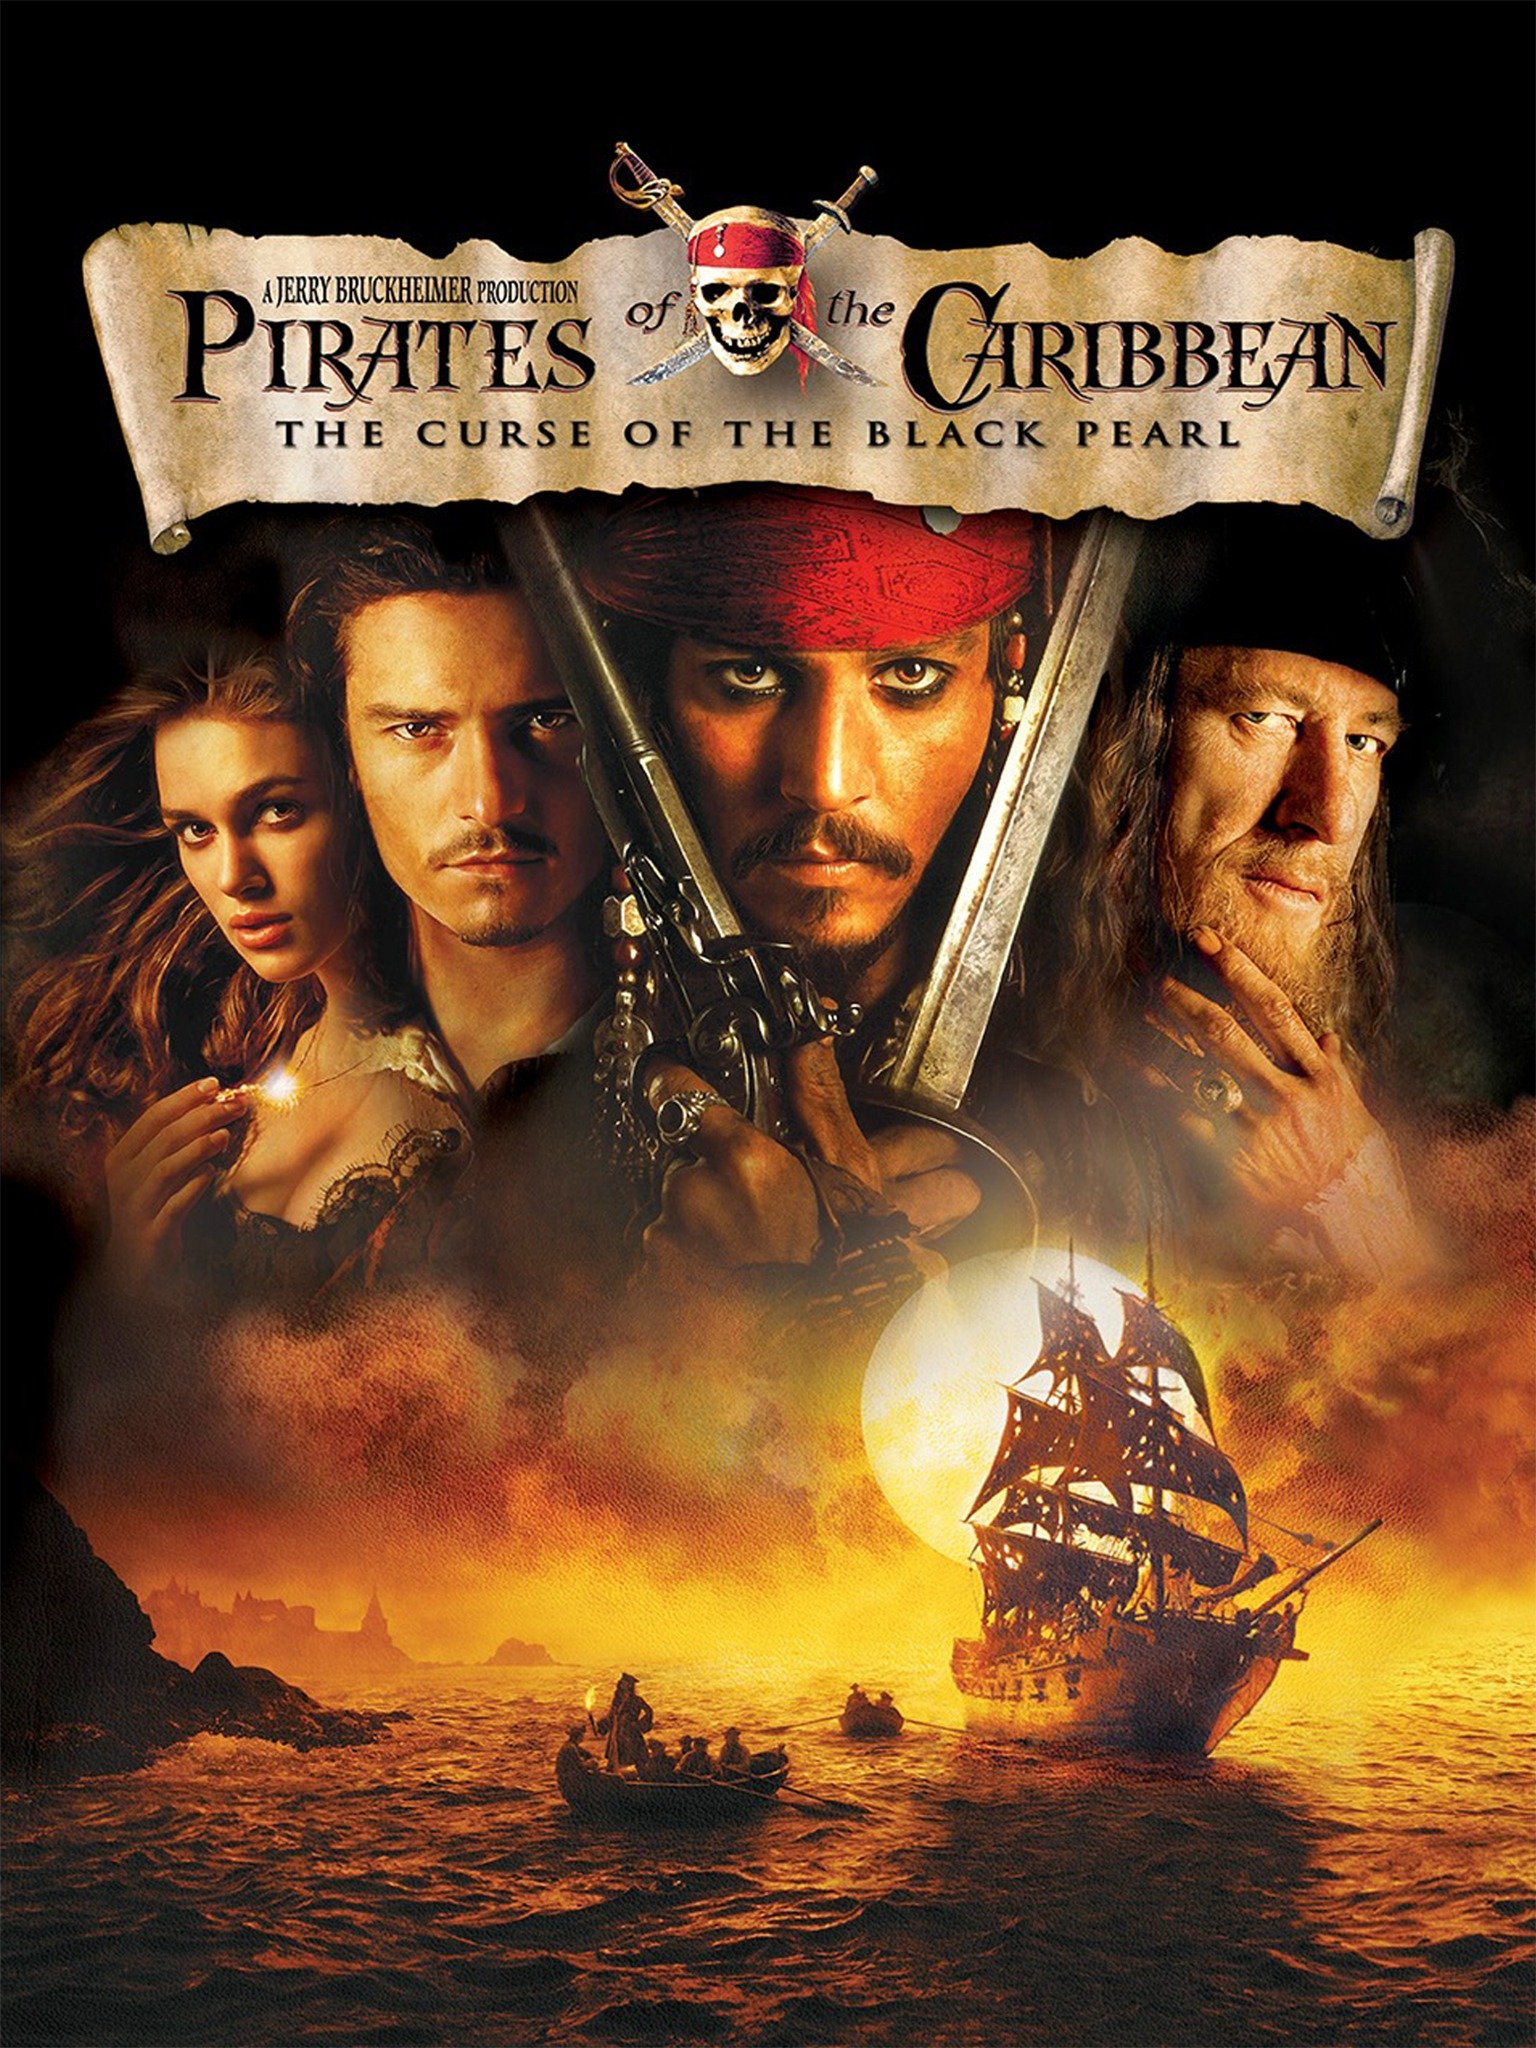 where can you watch the movie pirates 2005 online